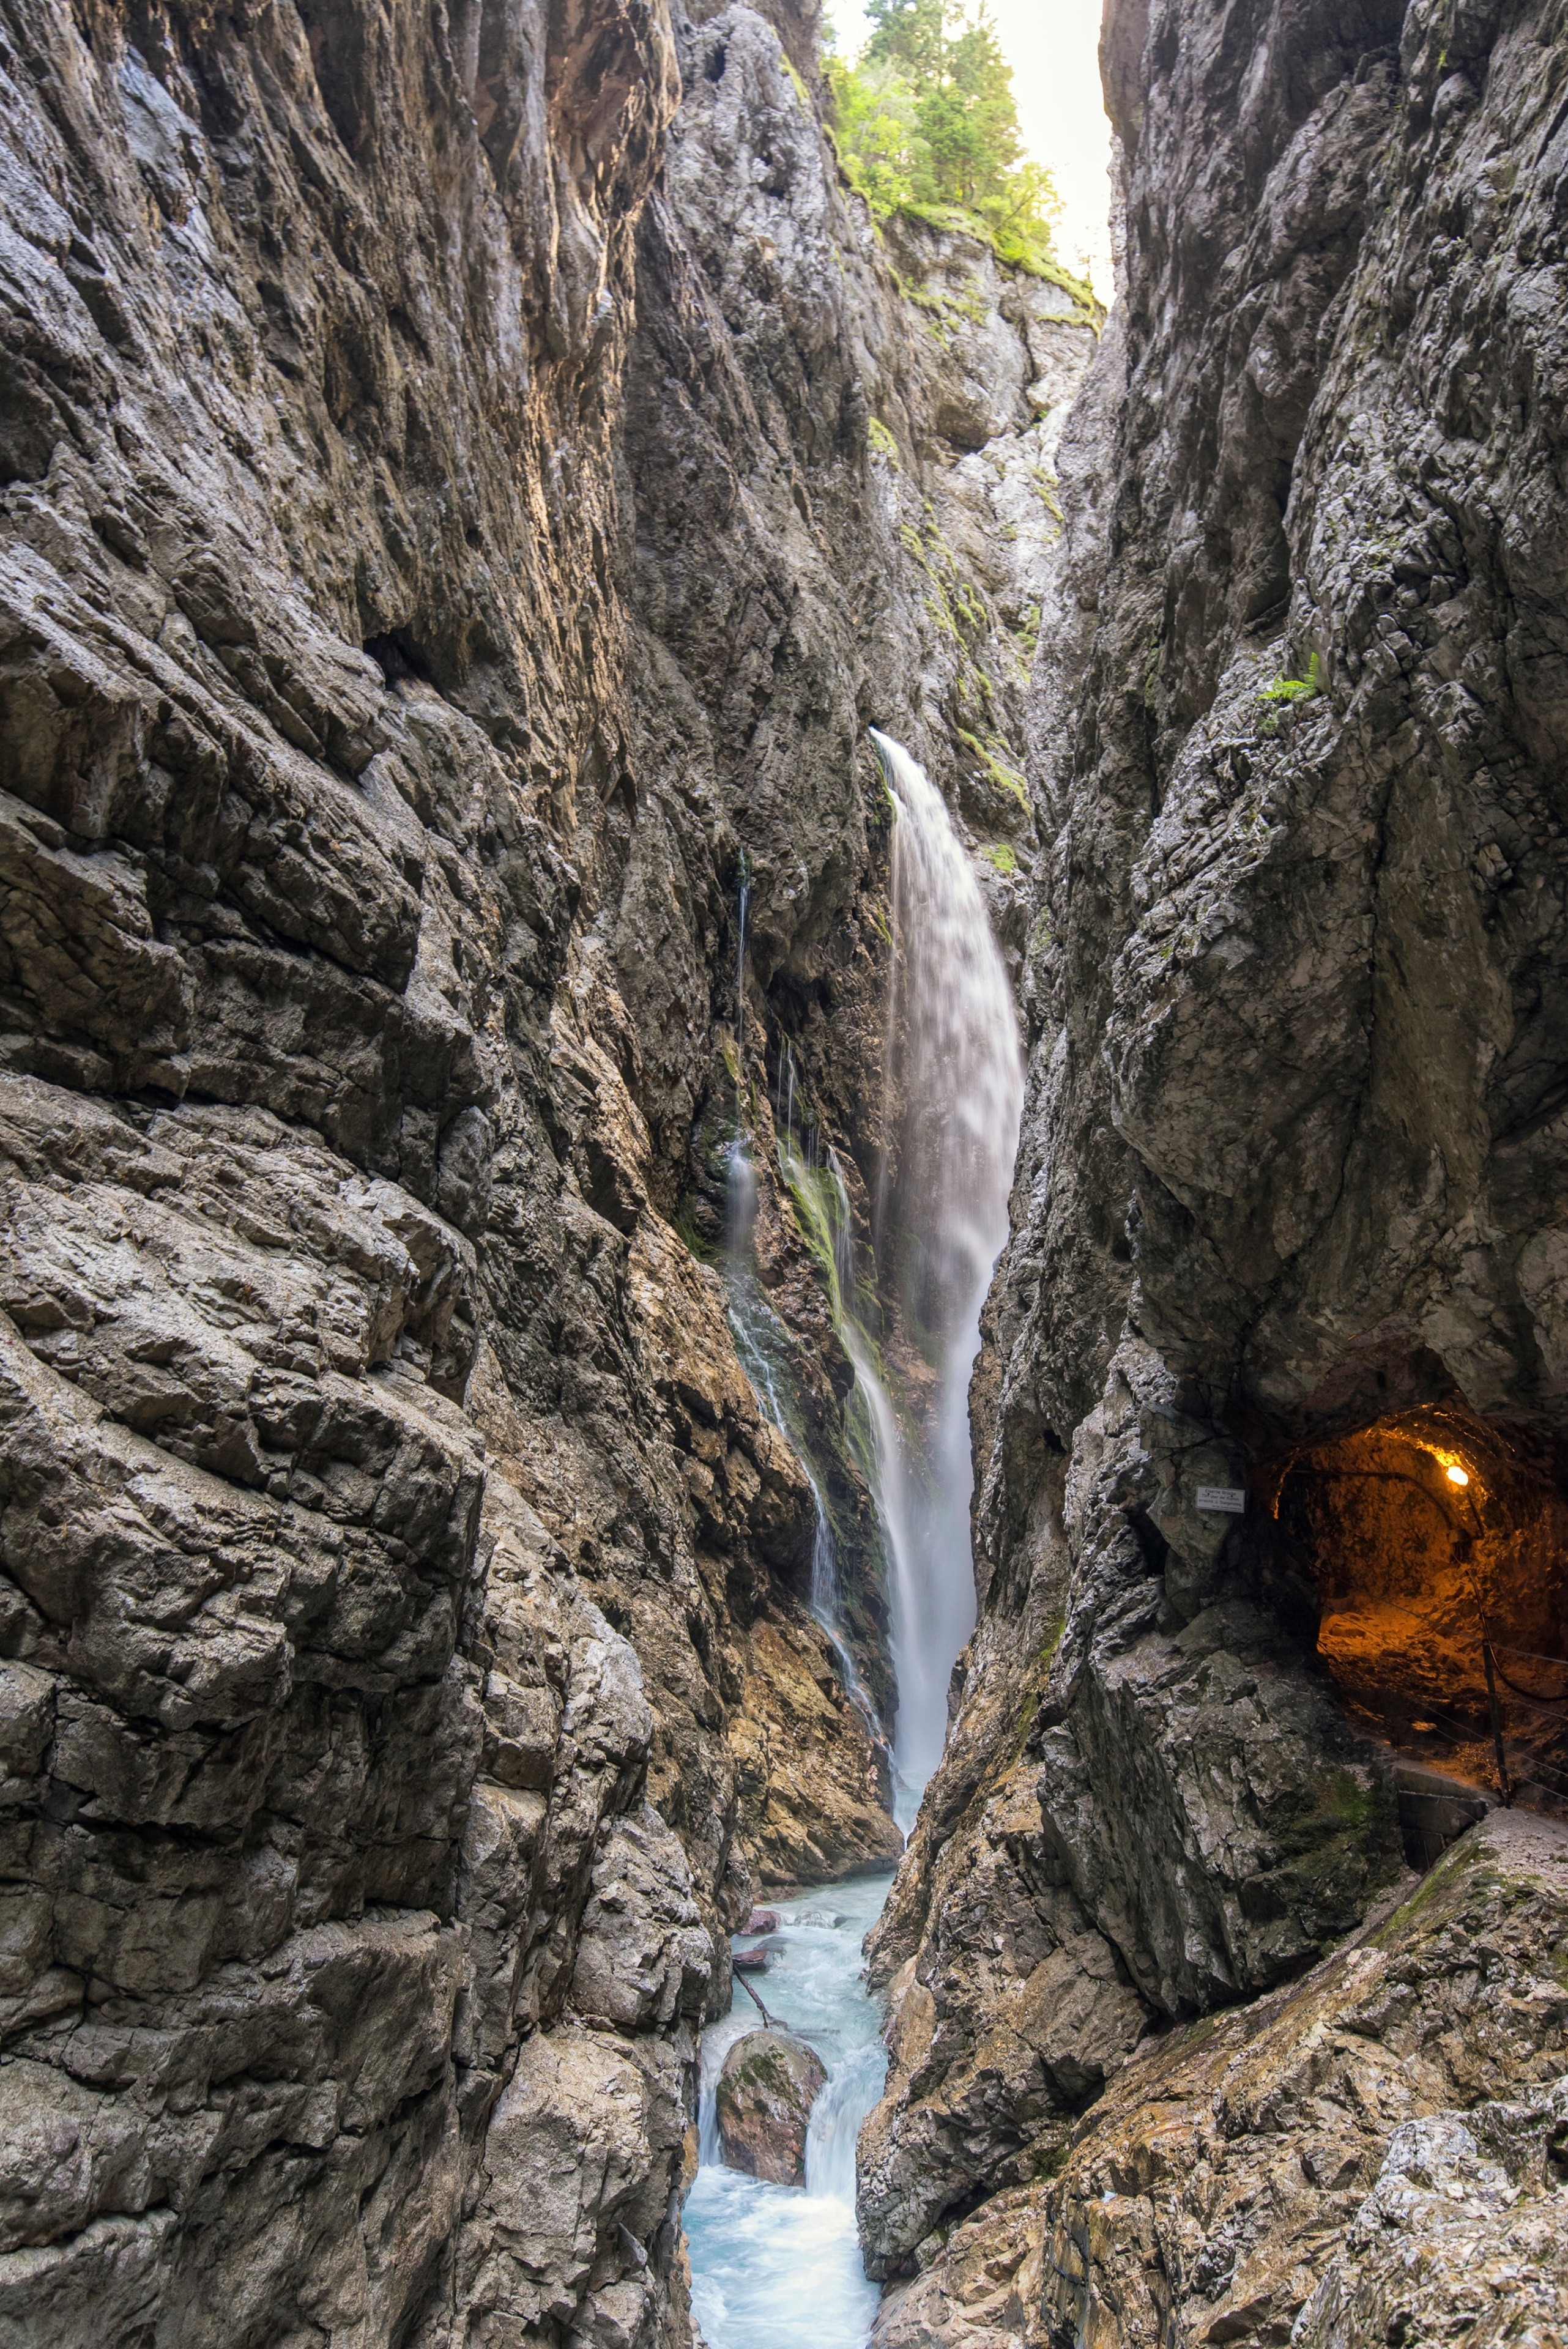 Höllentalklamm is a gorge in German Alps under two of the highest mountains Zugspitze and Alpspitze. Get ready to get wet but those views are fantastic. Really great #adventure